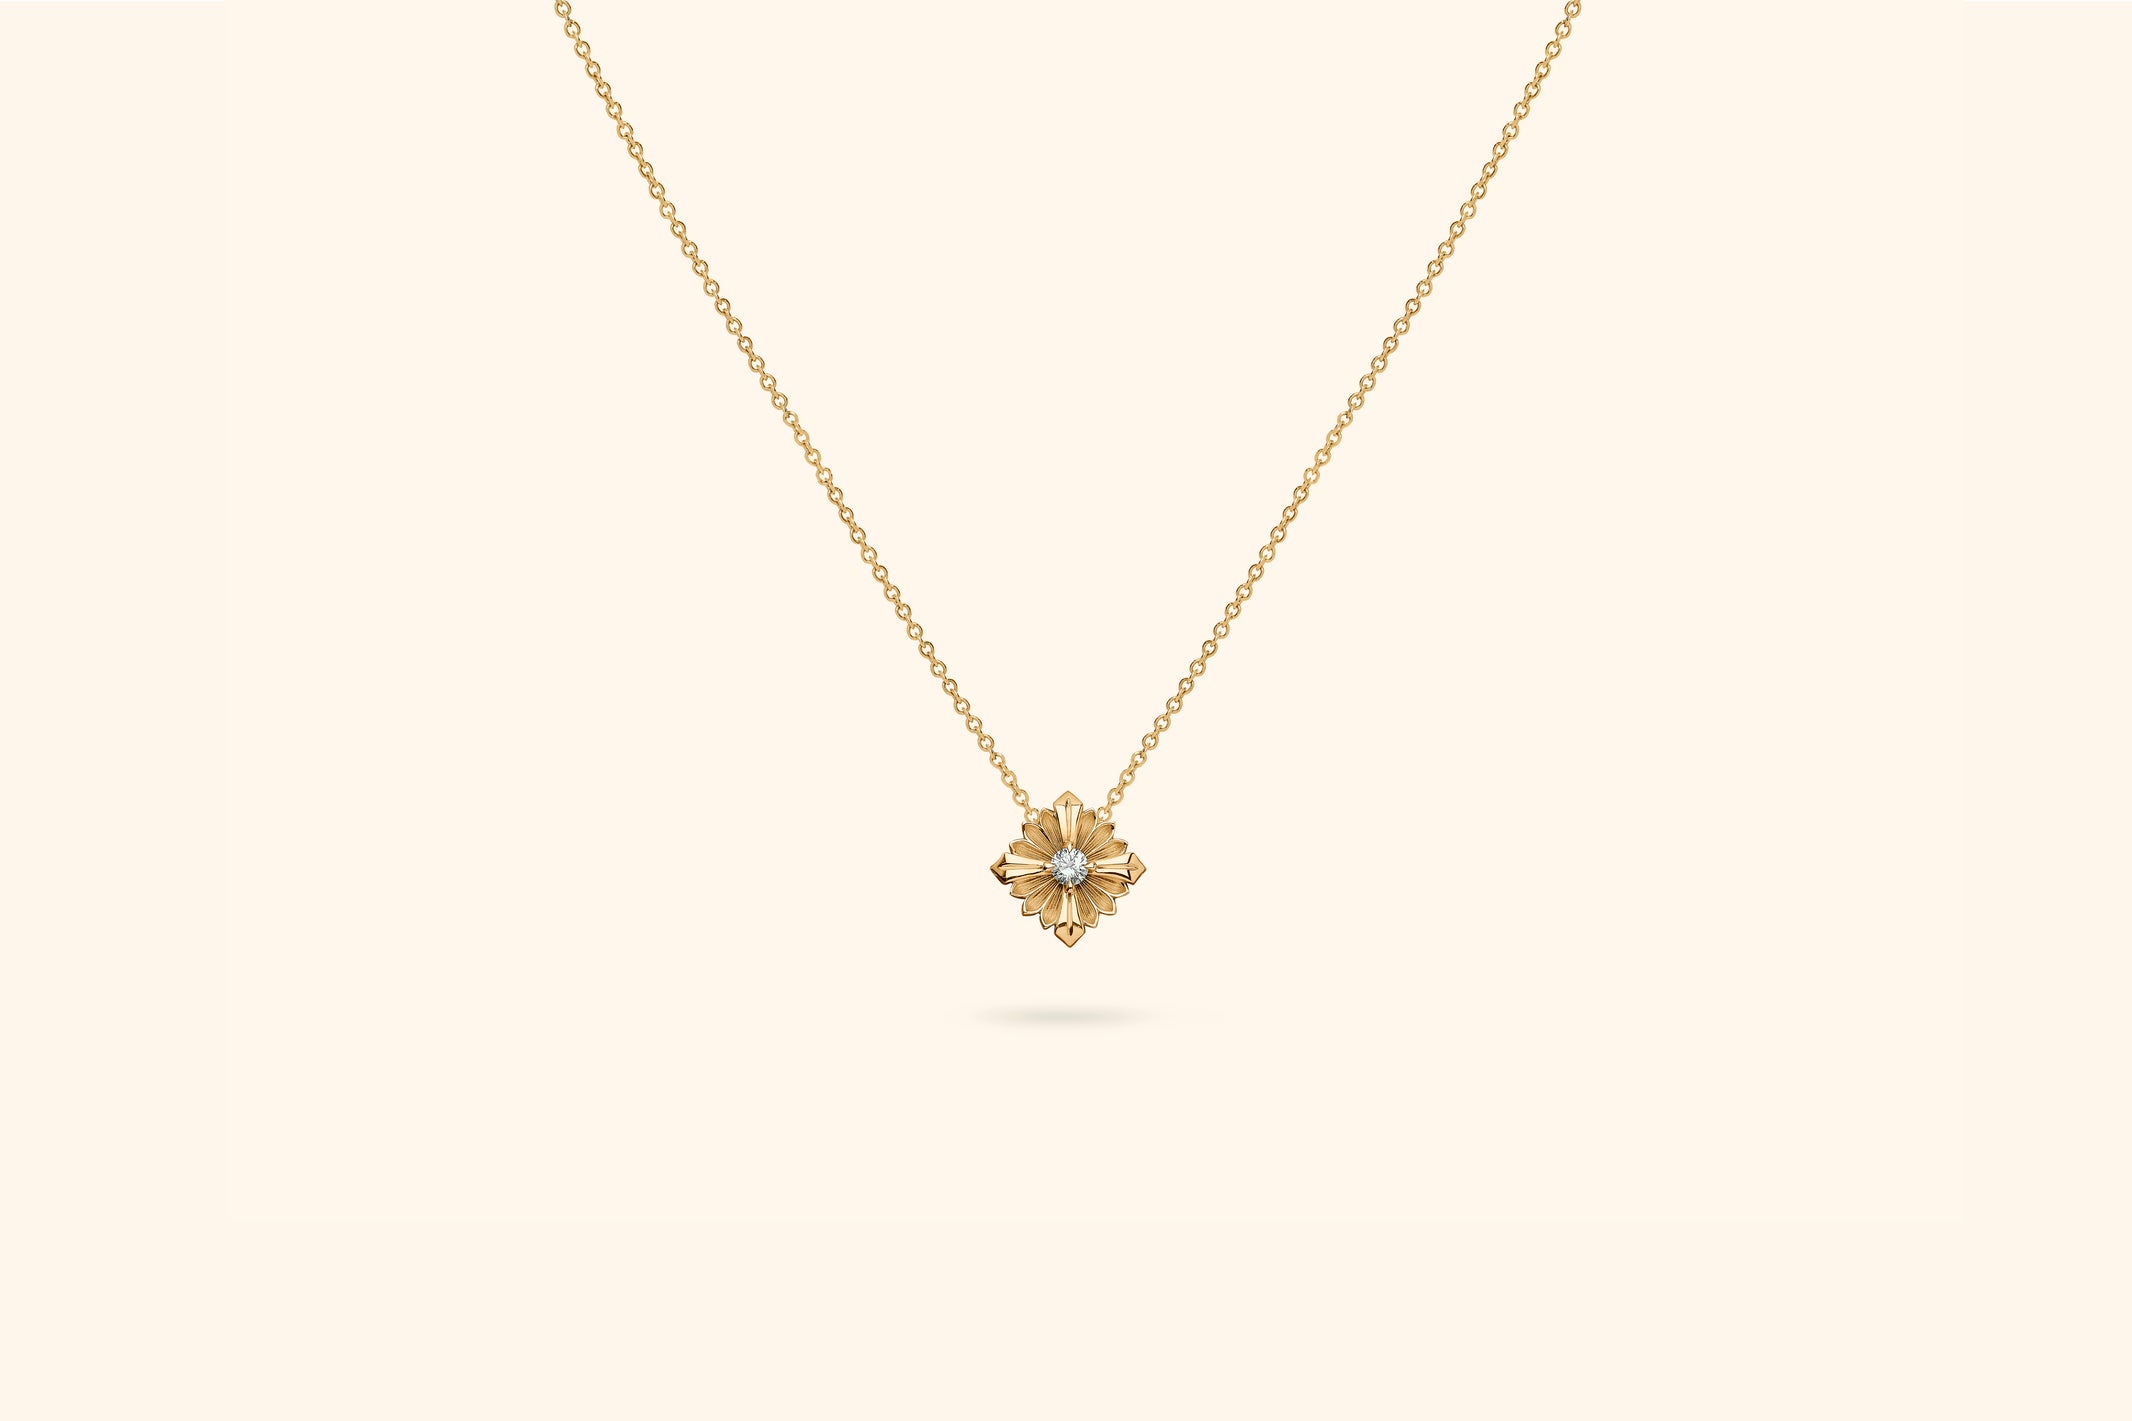 Stamp small necklace, yellow gold, diamond